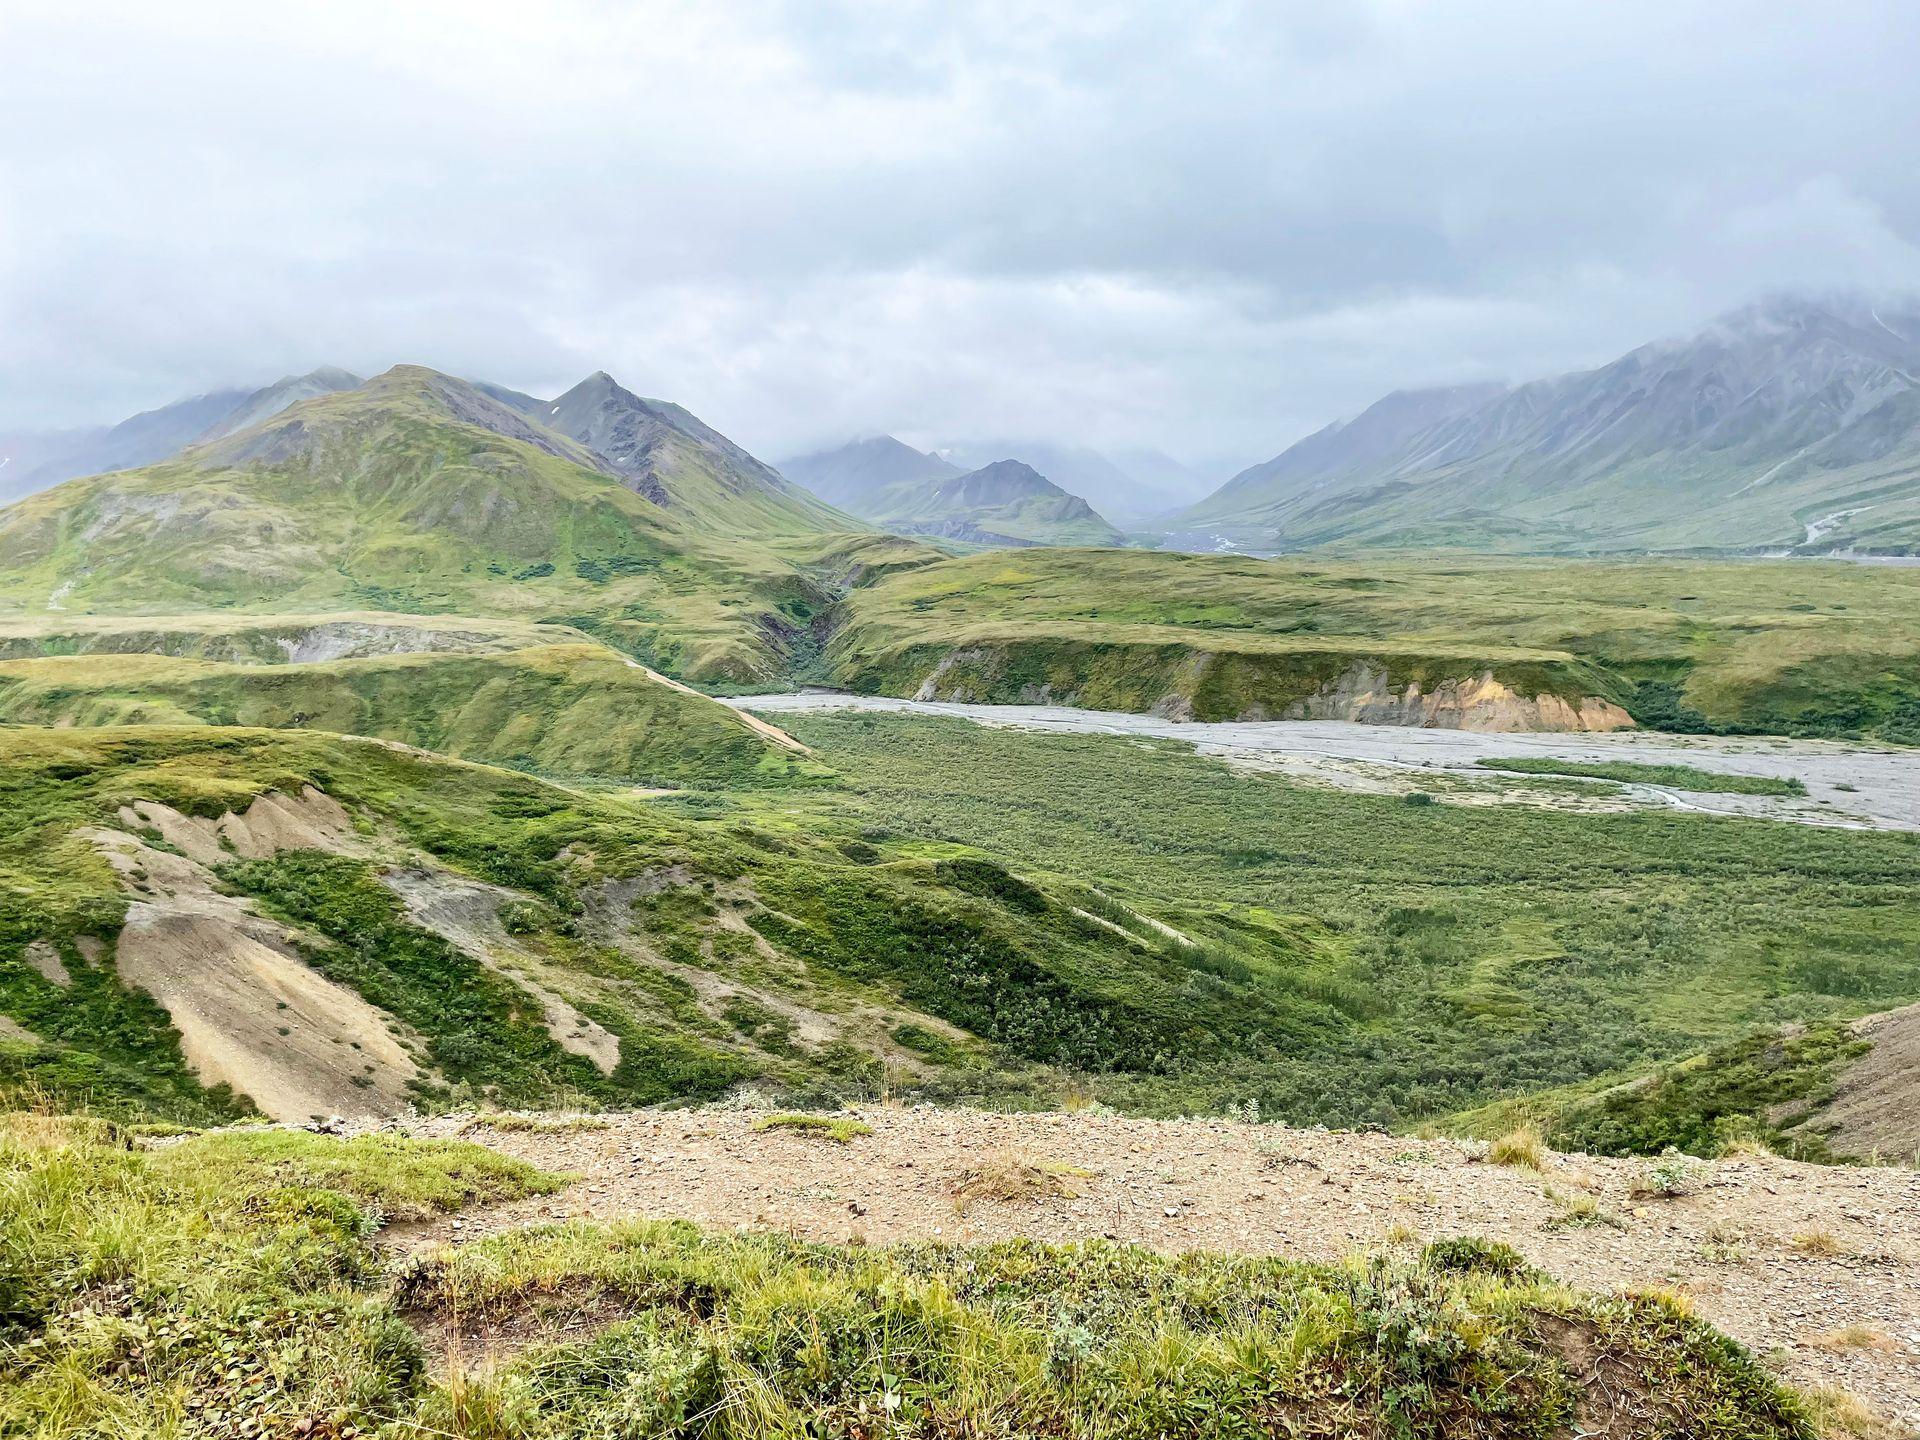 A view of greenery, mountains and a river inside of Denali National Park.